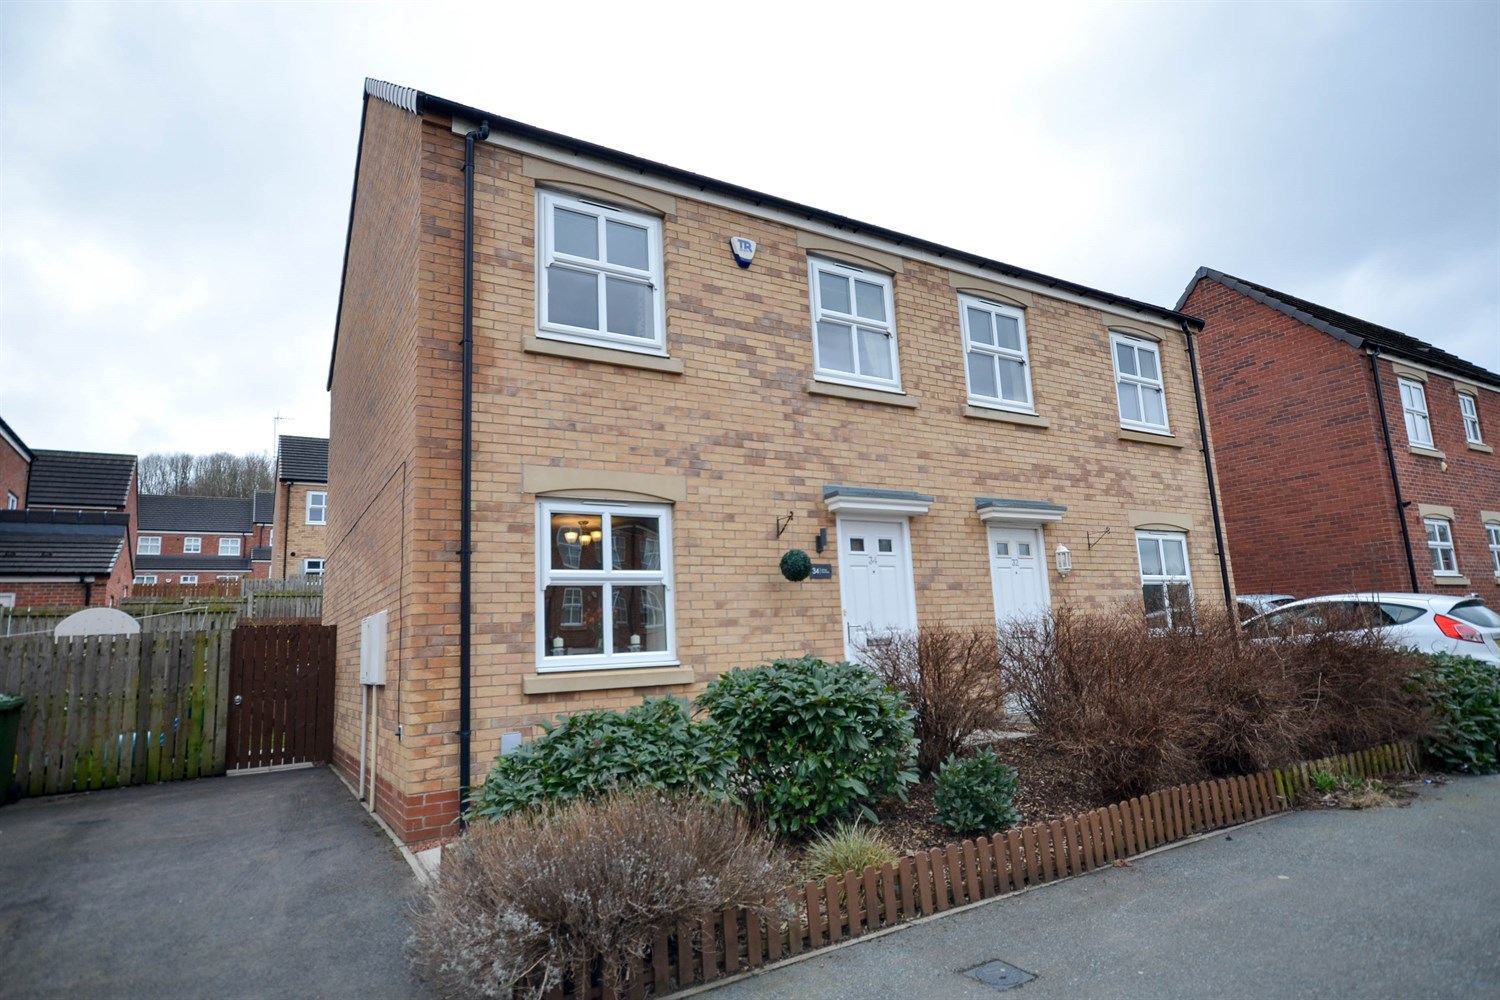 3 bed semi-detached house for sale in Bishops Park Road, Gateshead - Property Image 1